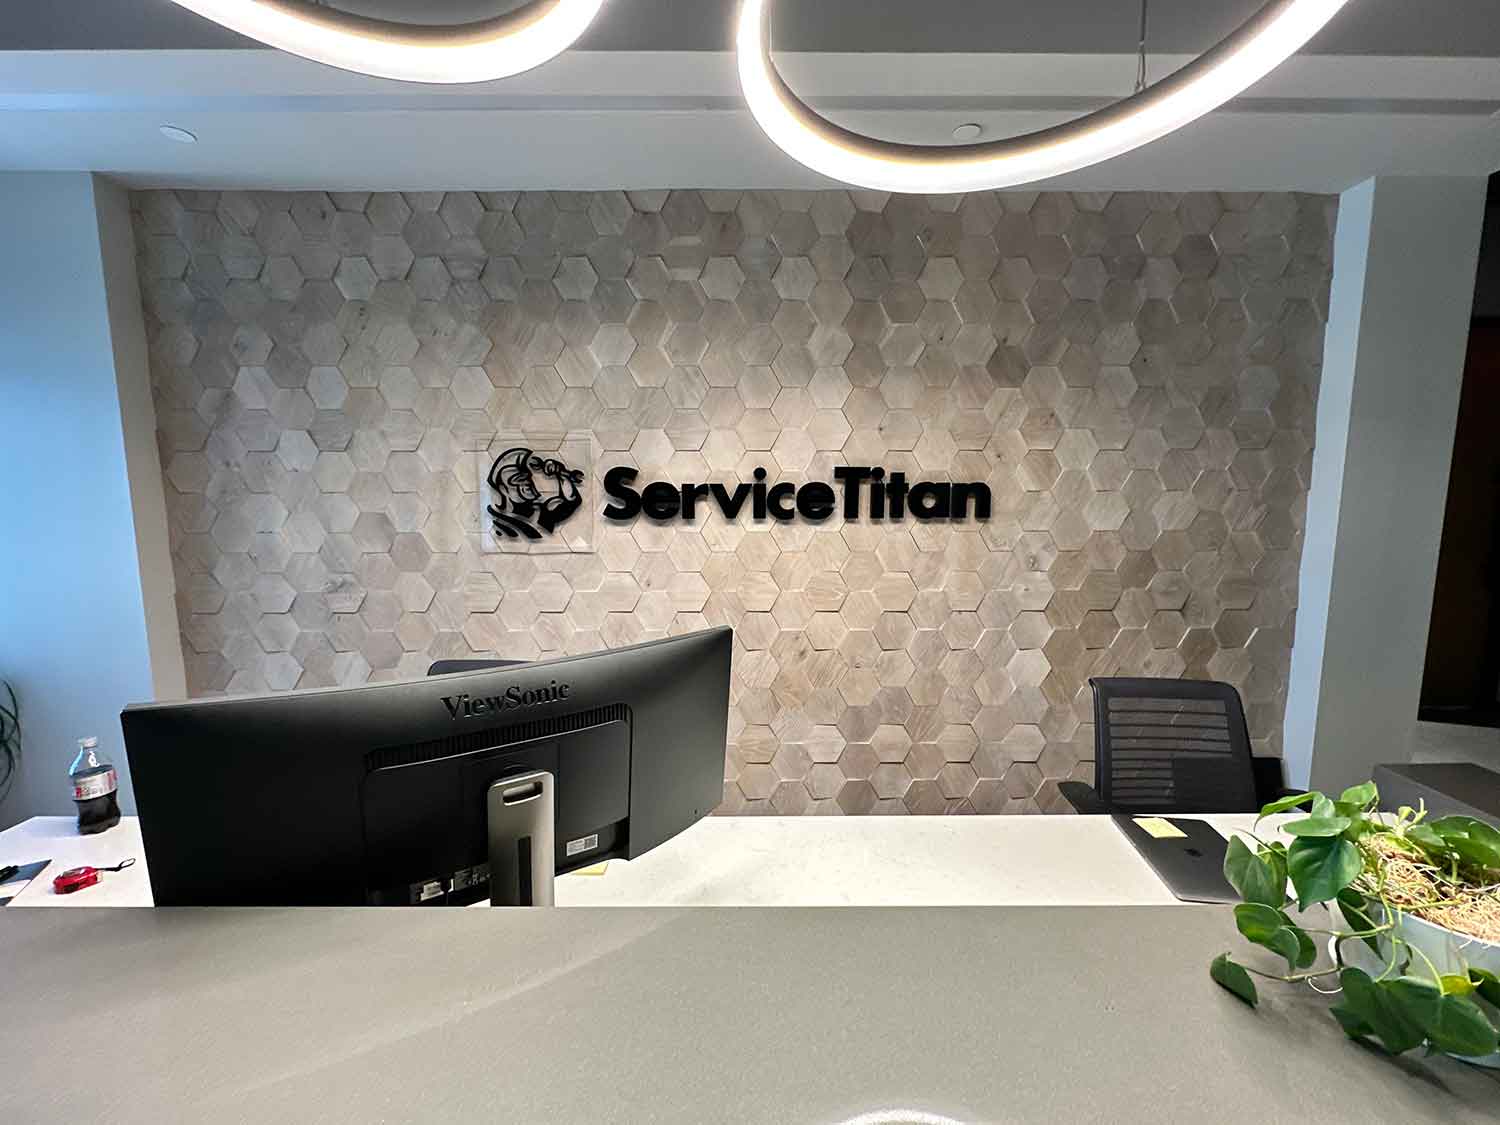 VisualPro created wall graphics and acrylic signage for Service Titan.